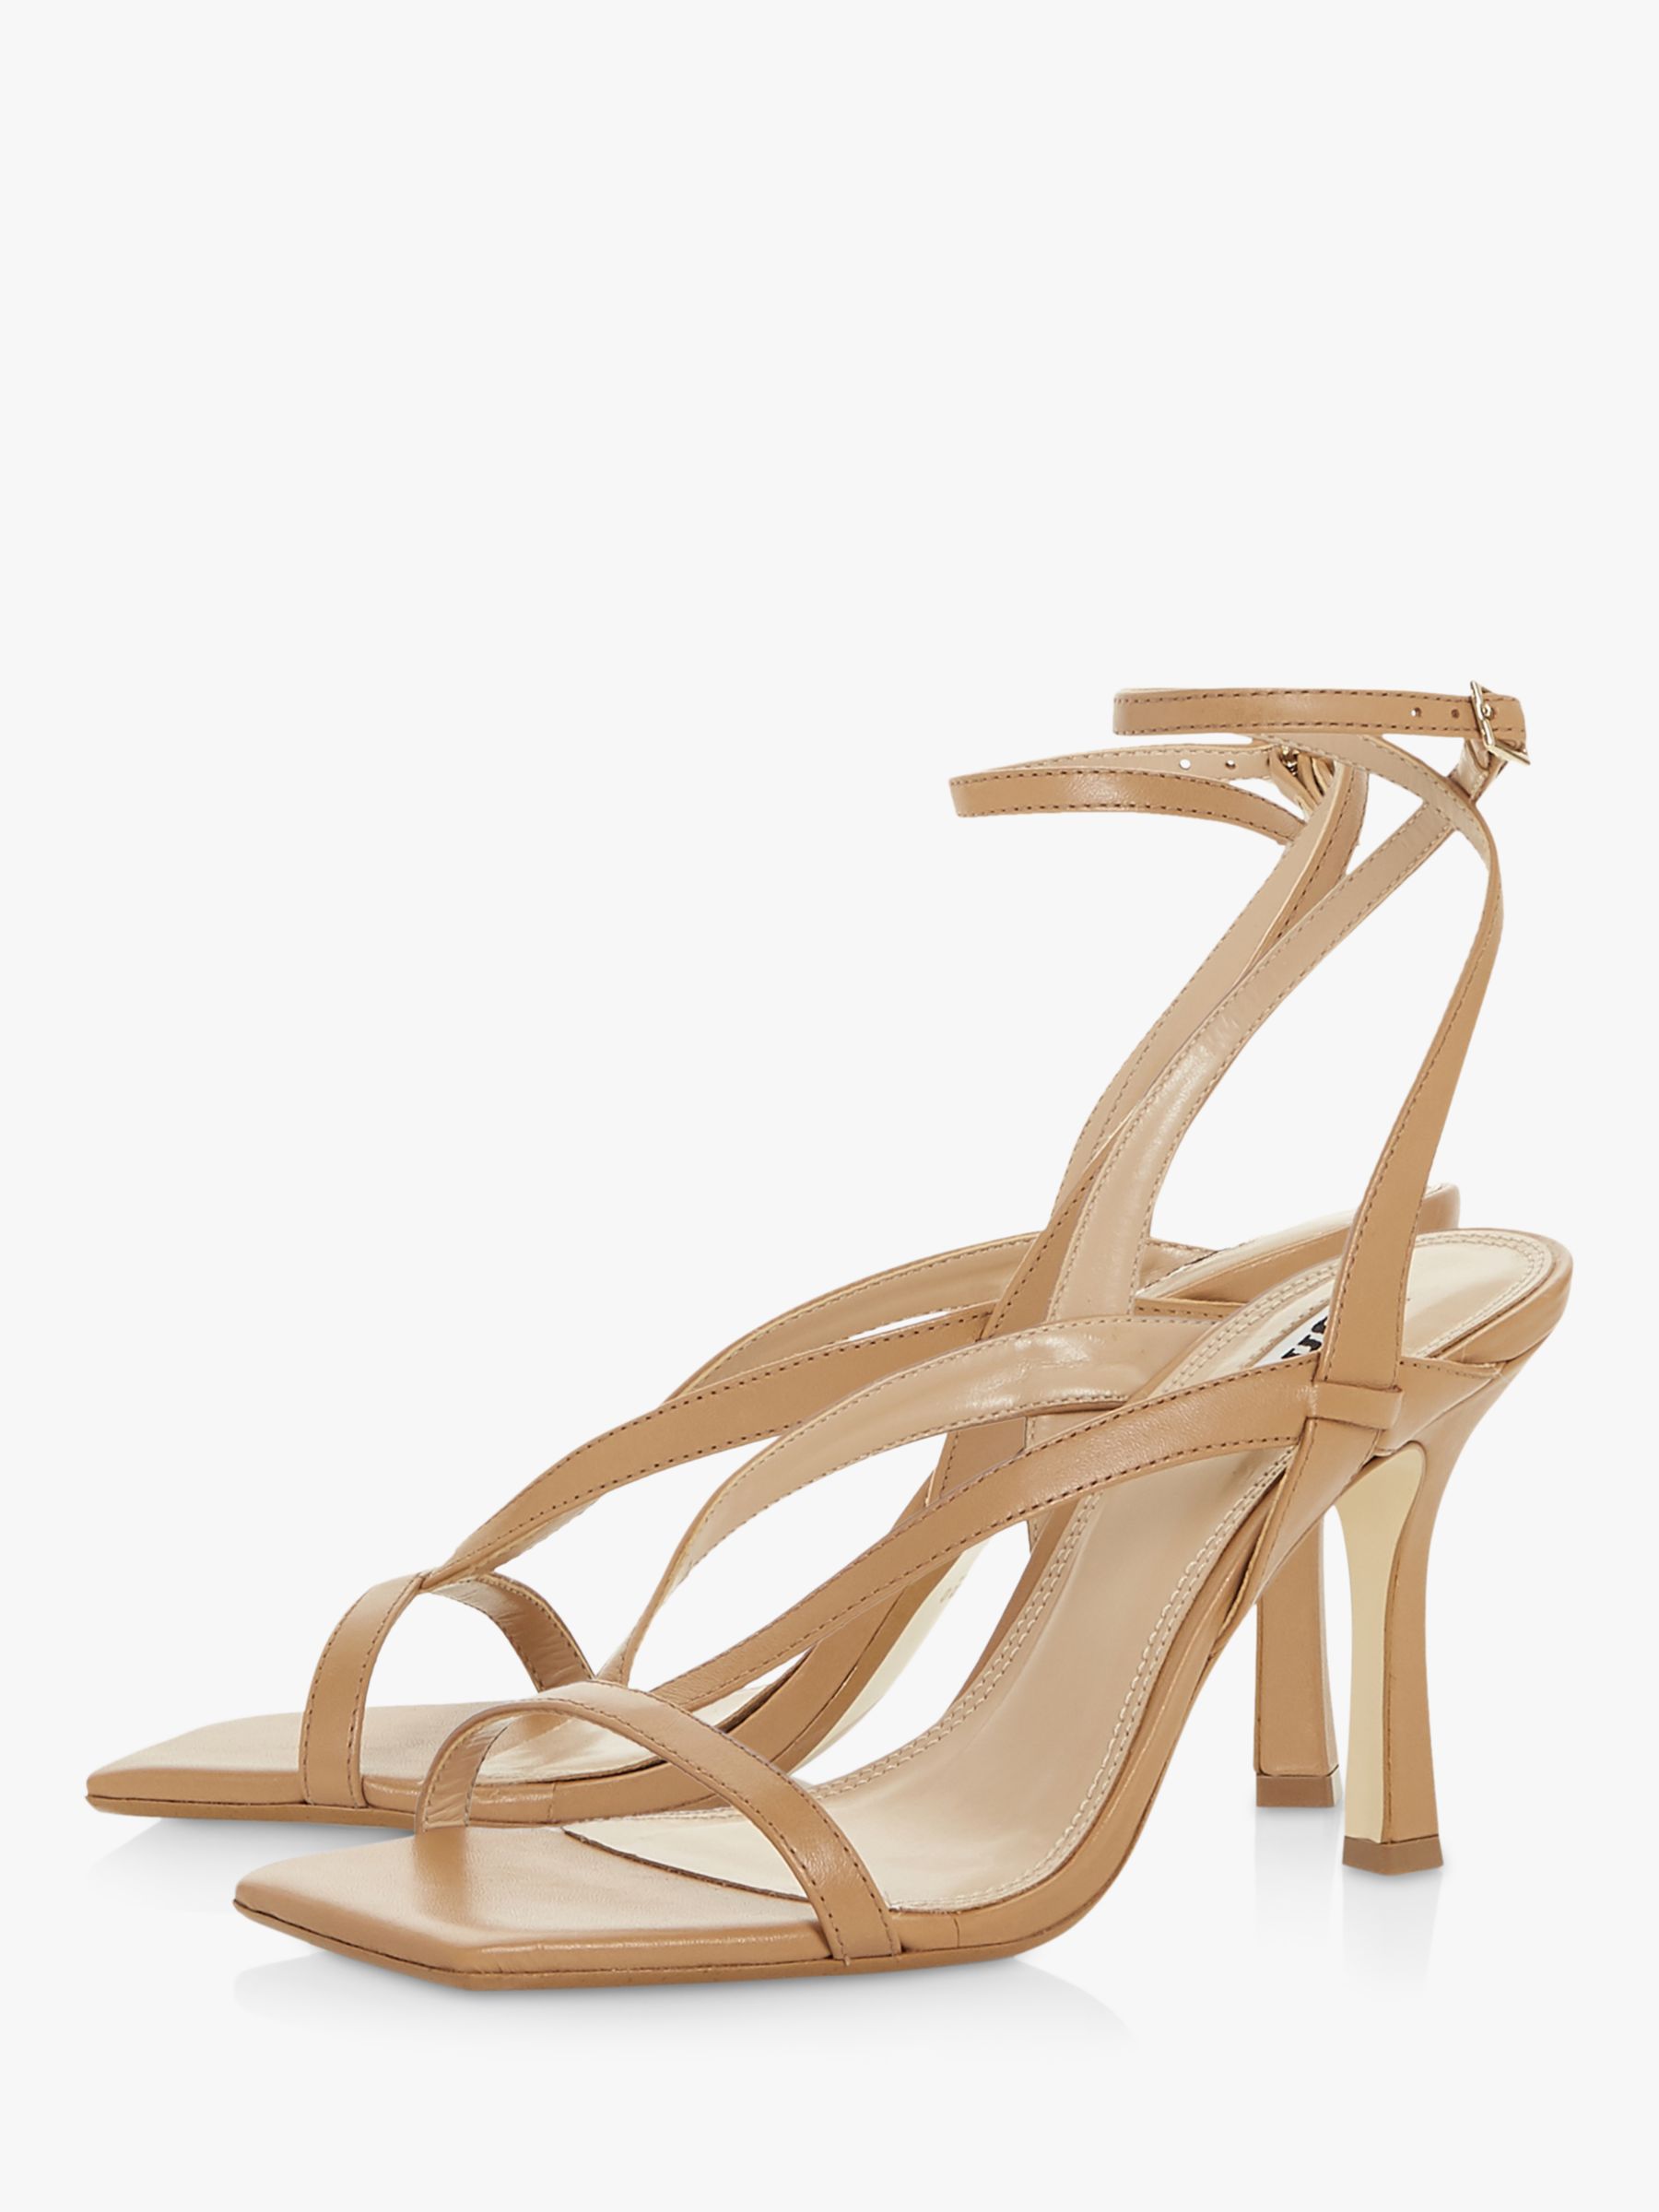 Dune Monterey Leather Strappy Sandals, Camel at John Lewis & Partners